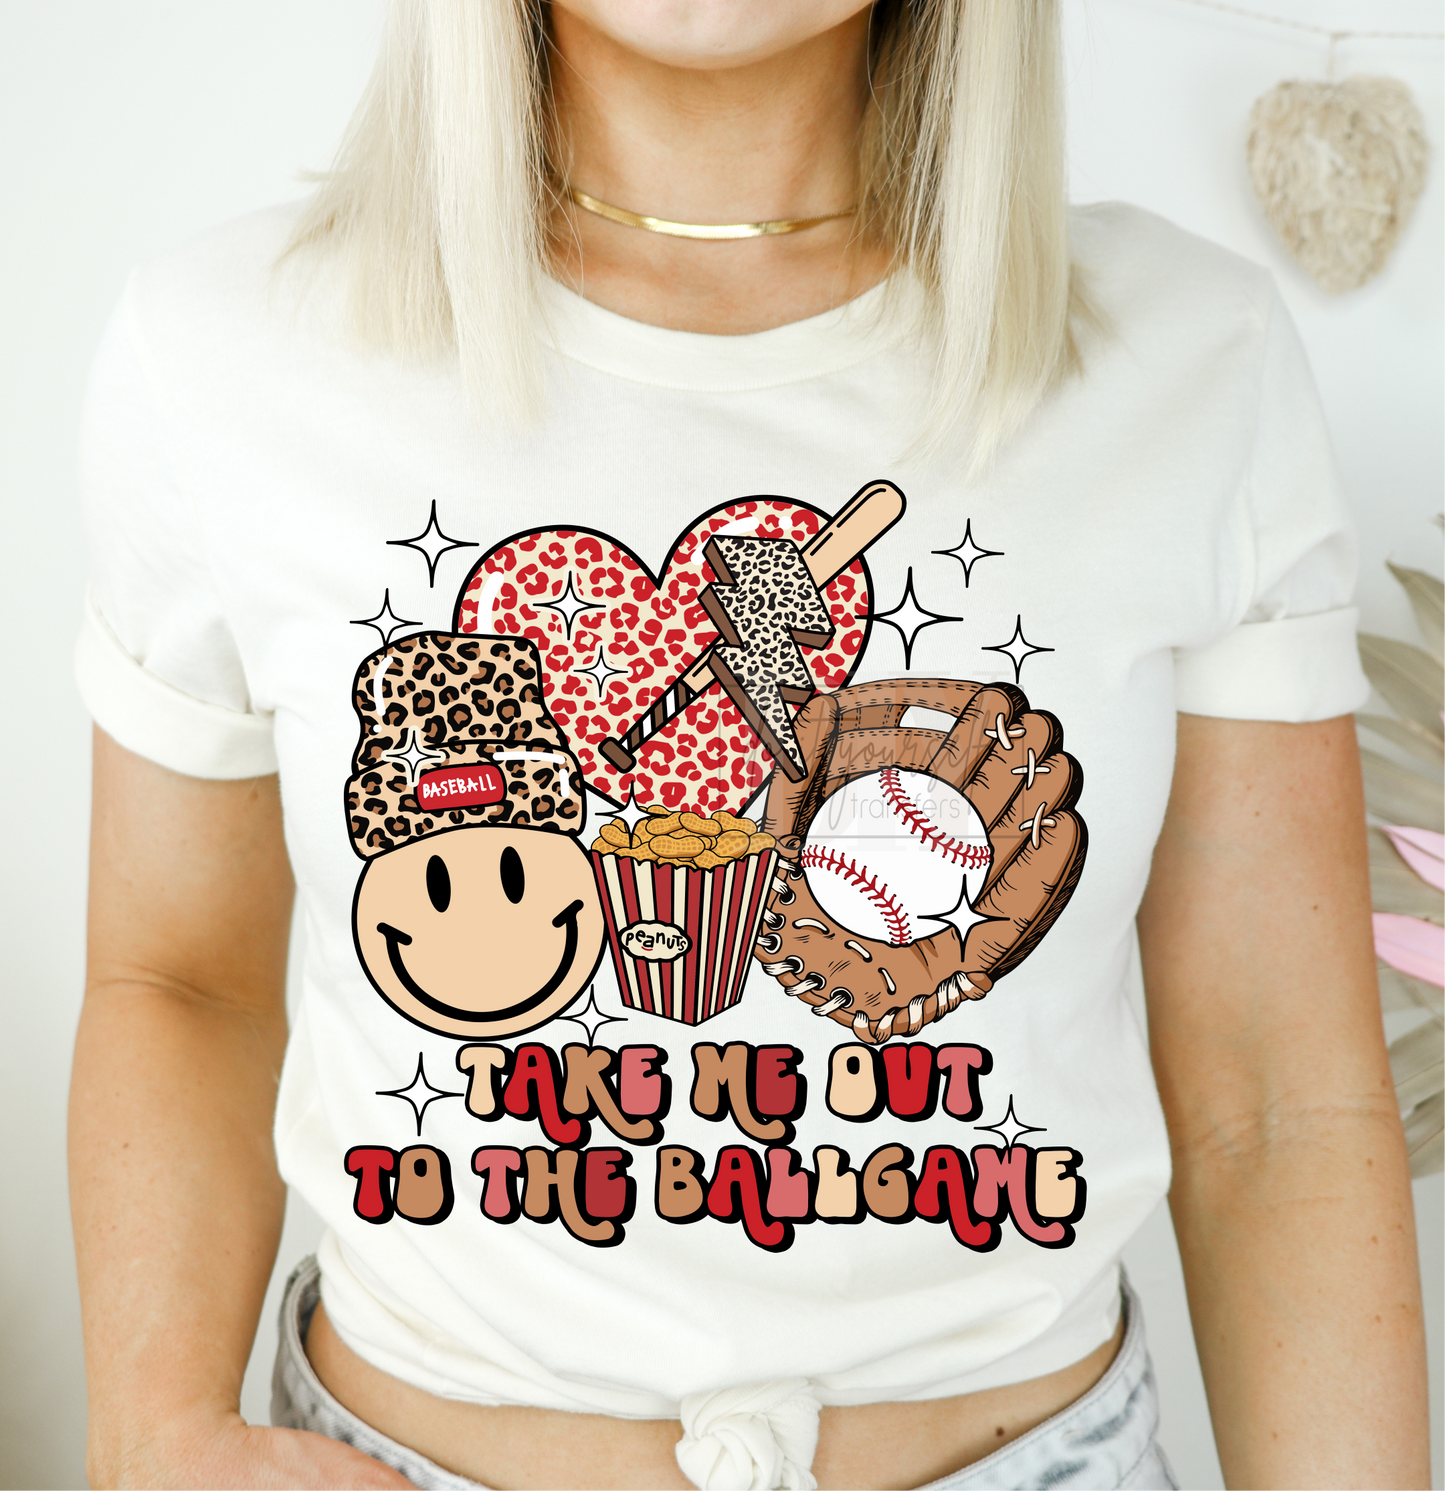 Take me out to the ballgame  BASEBALL smiley face beanie heart peanuts glove  ADULT  DTF TRANSFERPRINT TO ORDER